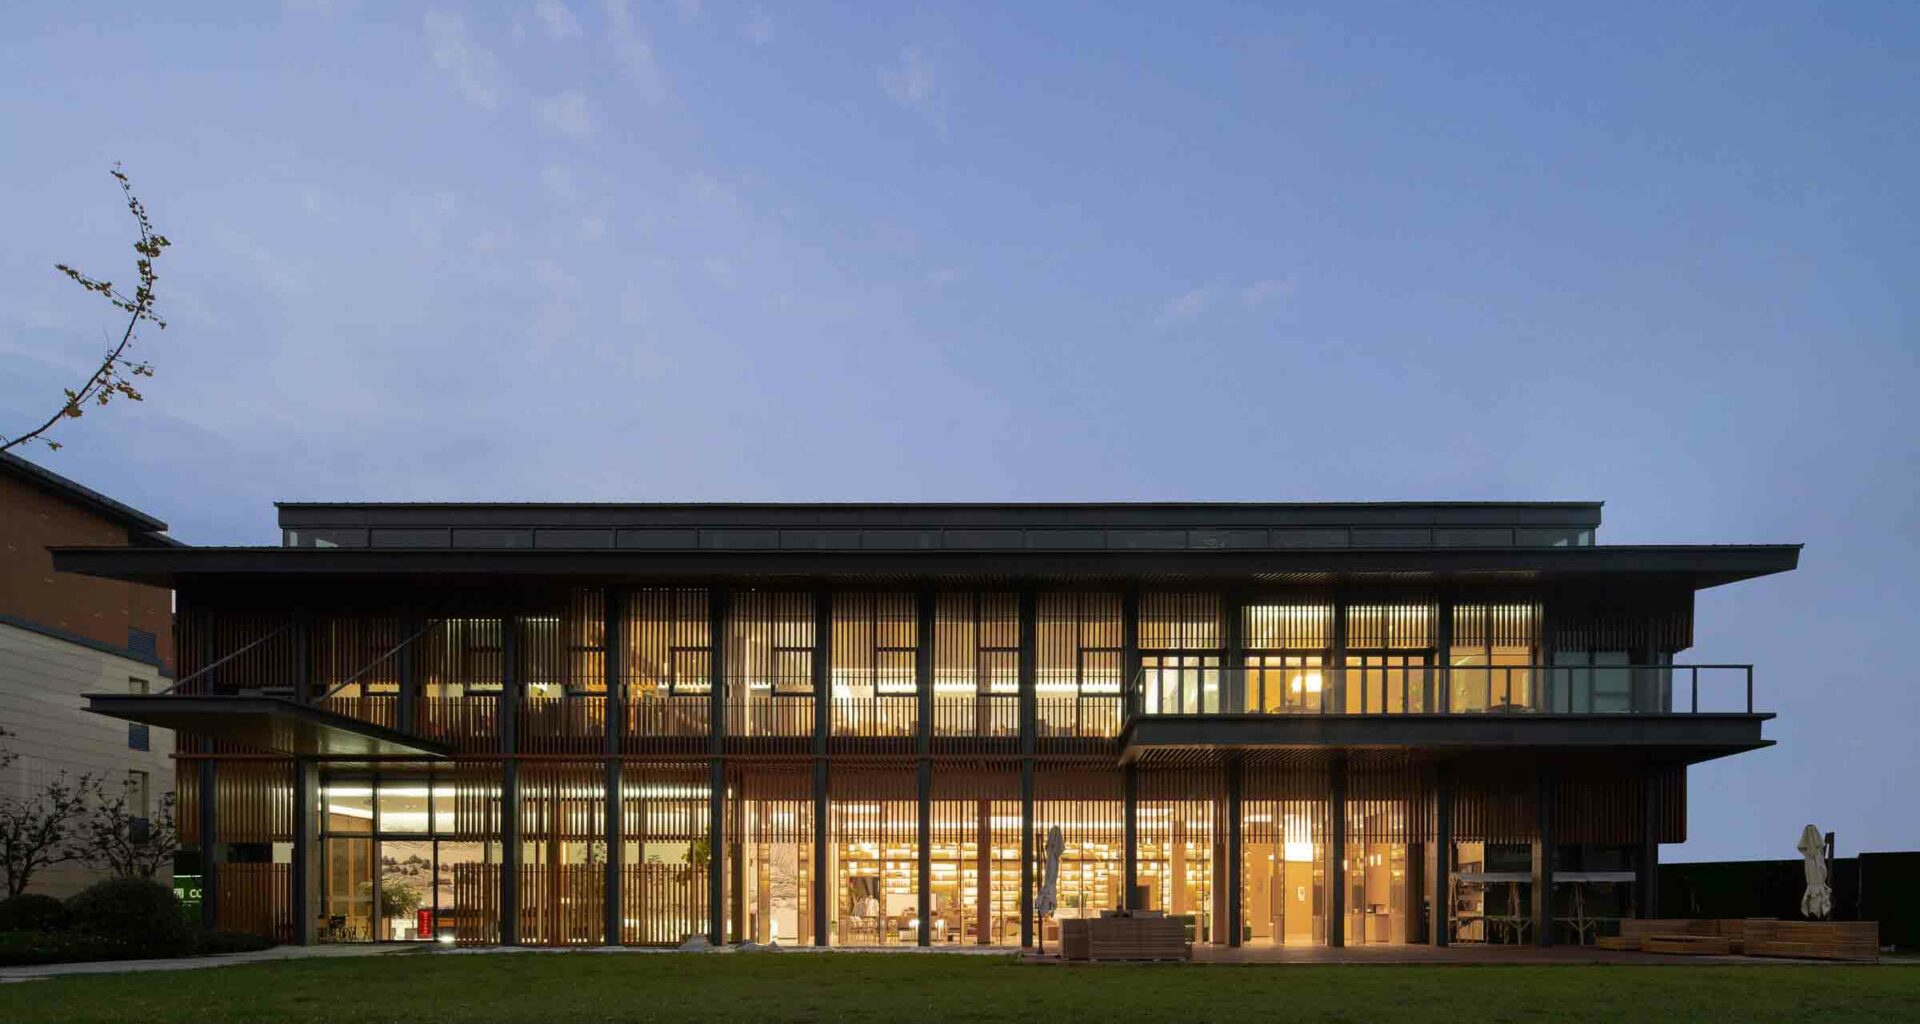 CHUNTAIYUE Pastoral Experience Center: Where Nature Meets Wellbeing for Seniors